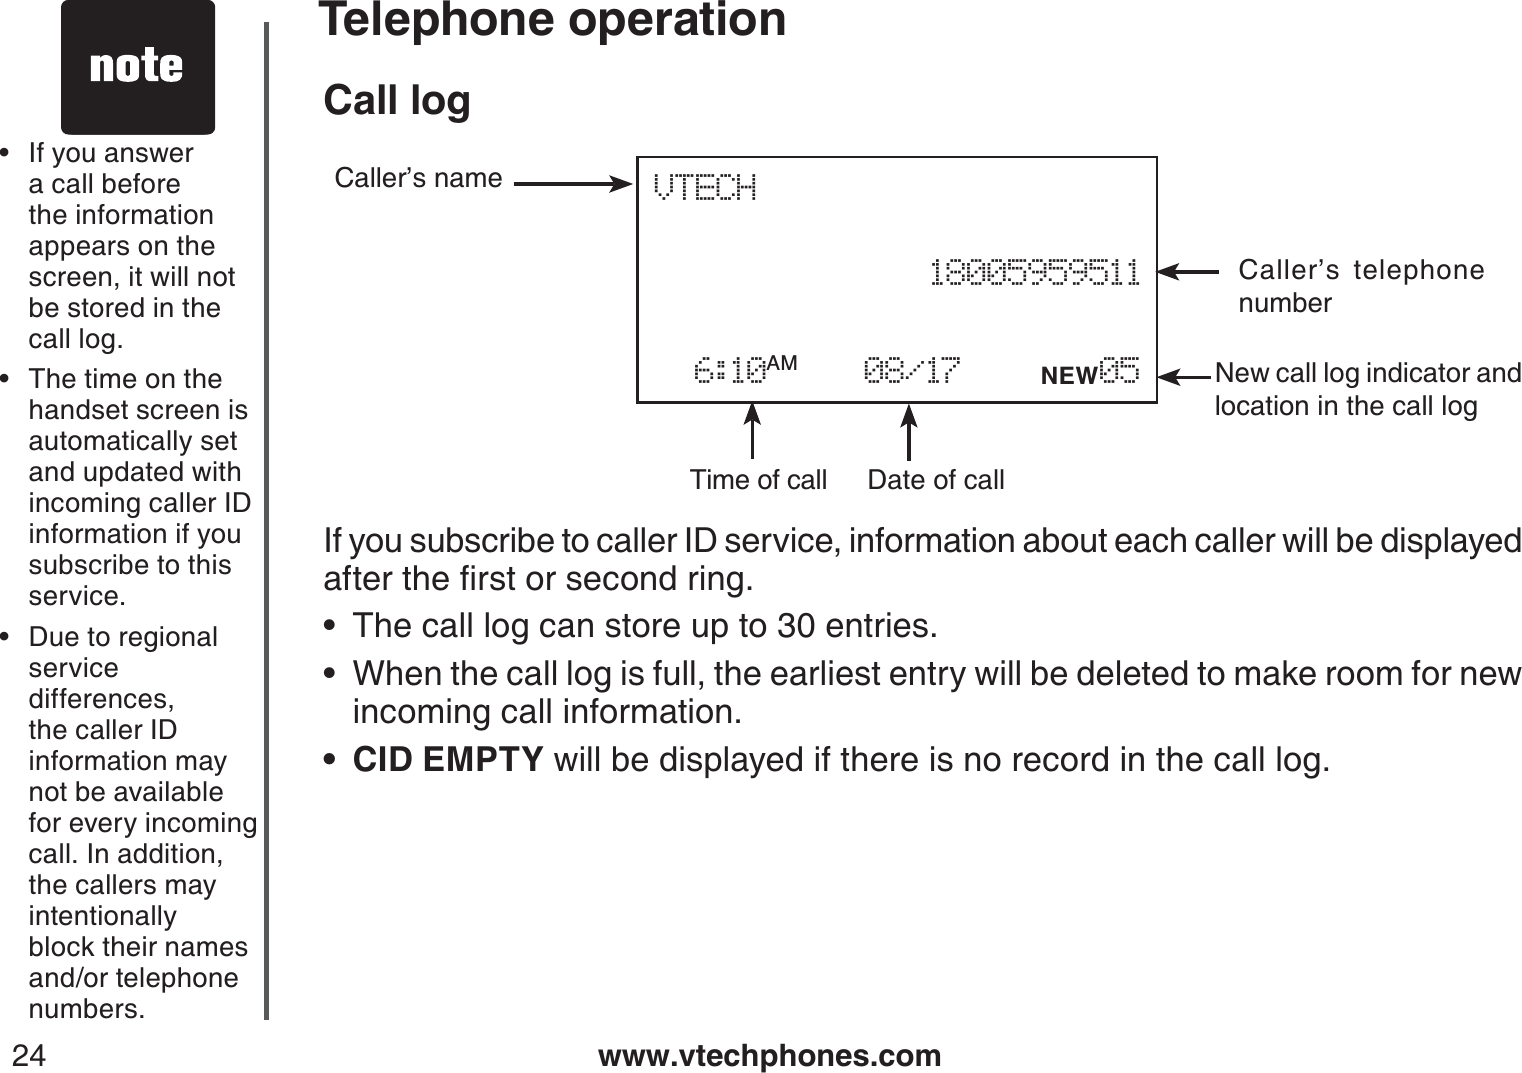 www.vtechphones.com24Telephone operationCall logIf you subscribe to caller ID service, information about each caller will be displayed CHVGTVJGſTUVQTUGEQPFTKPIThe call log can store up to 30 entries.When the call log is full, the earliest entry will be deleted to make room for new incoming call information.CID EMPTY will be displayed if there is no record in the call log.•••If you answer a call before the information appears on the screen, it will not be stored in the call log.The time on the handset screen isautomatically set and updated with incoming caller ID information if you subscribe to thisservice.Due to regional service differences, the caller ID information may not be available for every incoming call. In addition, the callers may intentionally block their names and/or telephone numbers.•••Date of callTime of callCaller’s telephone numberCaller’s nameNew call log indicator and location in the call logVTECH    18005959511  6:10AM    08/17    NEW05 